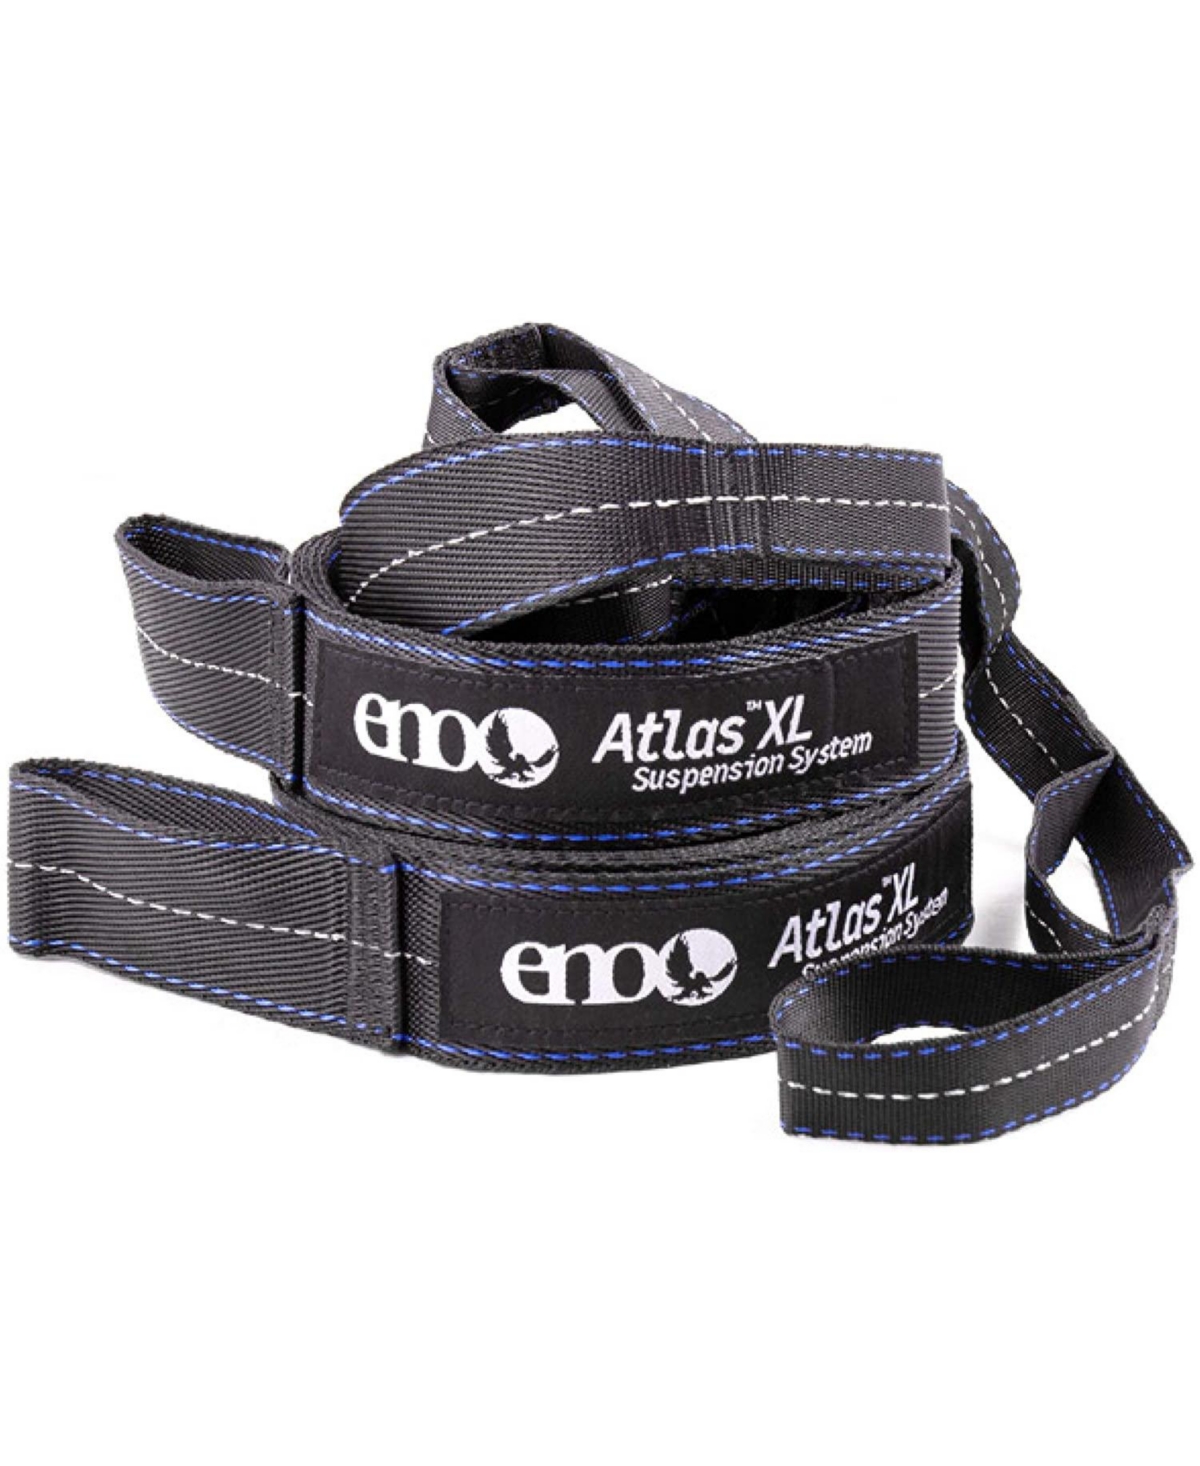 Atlas Xl Suspension System - Tree Strap for Hammock - Accessories for Camping, Hiking, and Backpacking - Black/Royal - Black/Royal